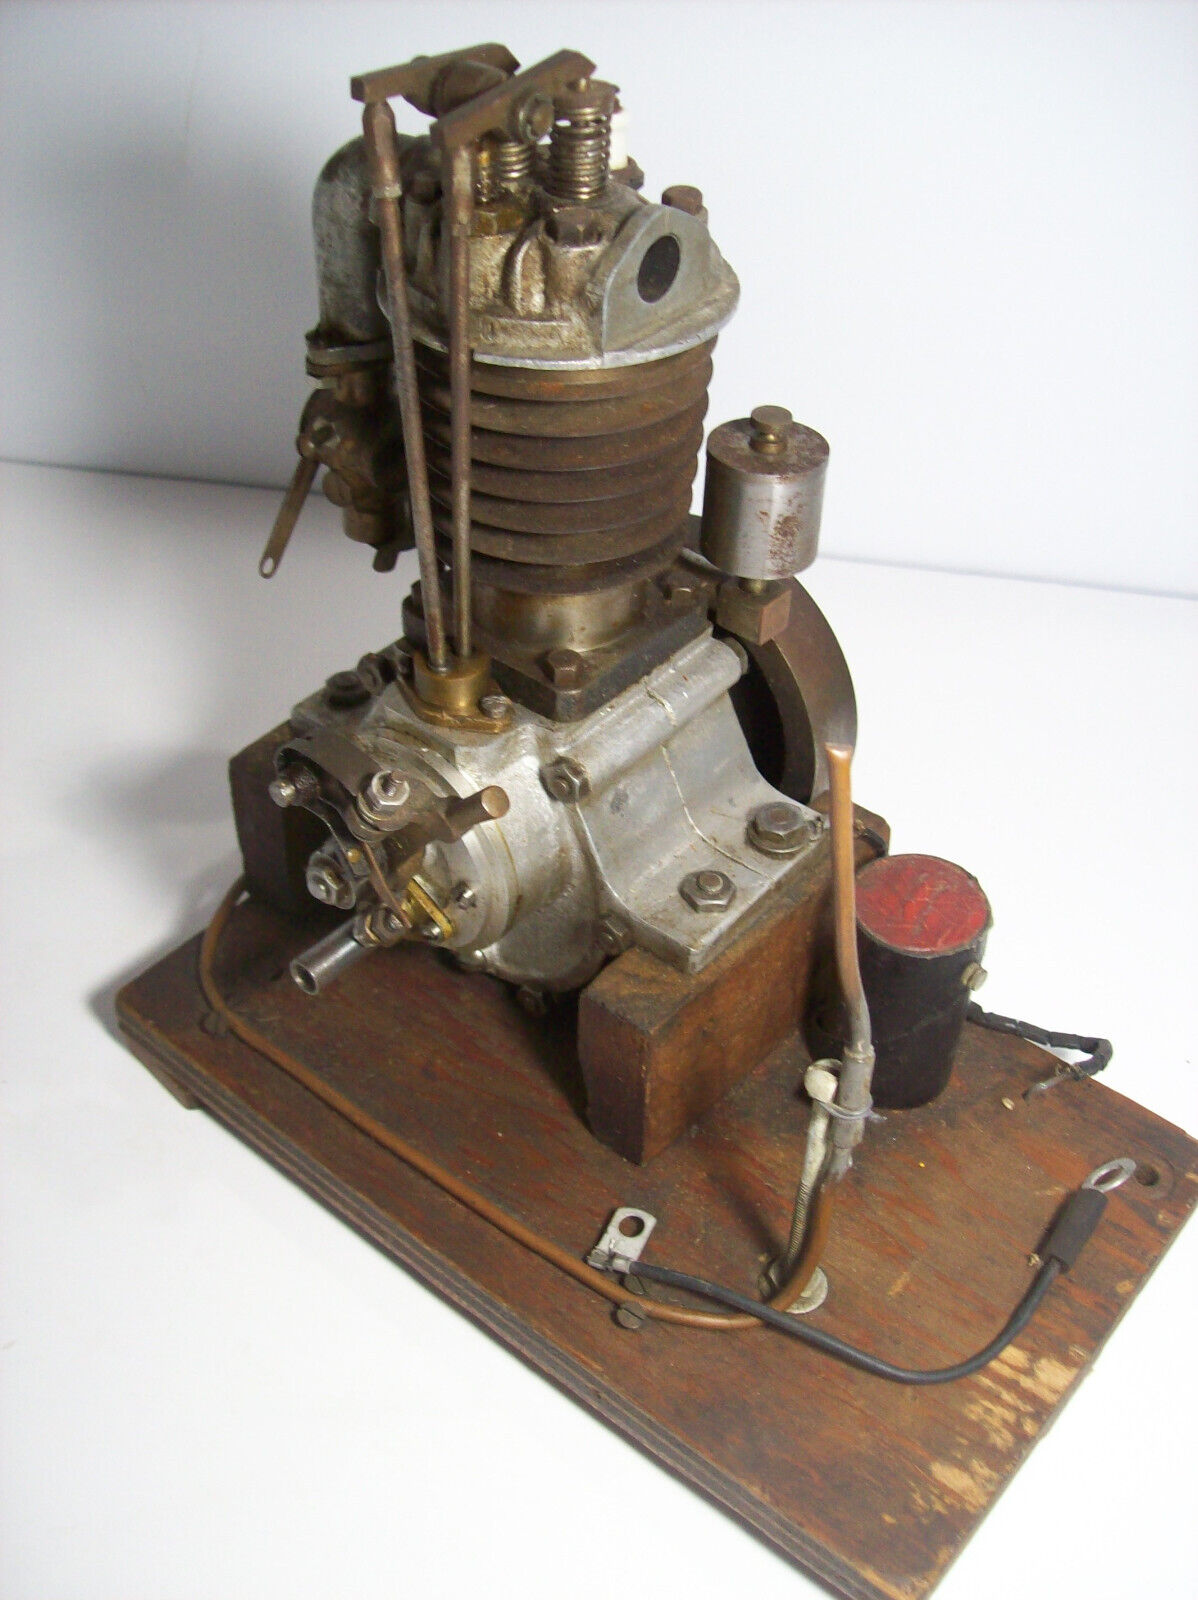 ELMER A. WALL MINATURE 1 HP 4-CYCLE GAS ENGINE, 1931-1948, Complete